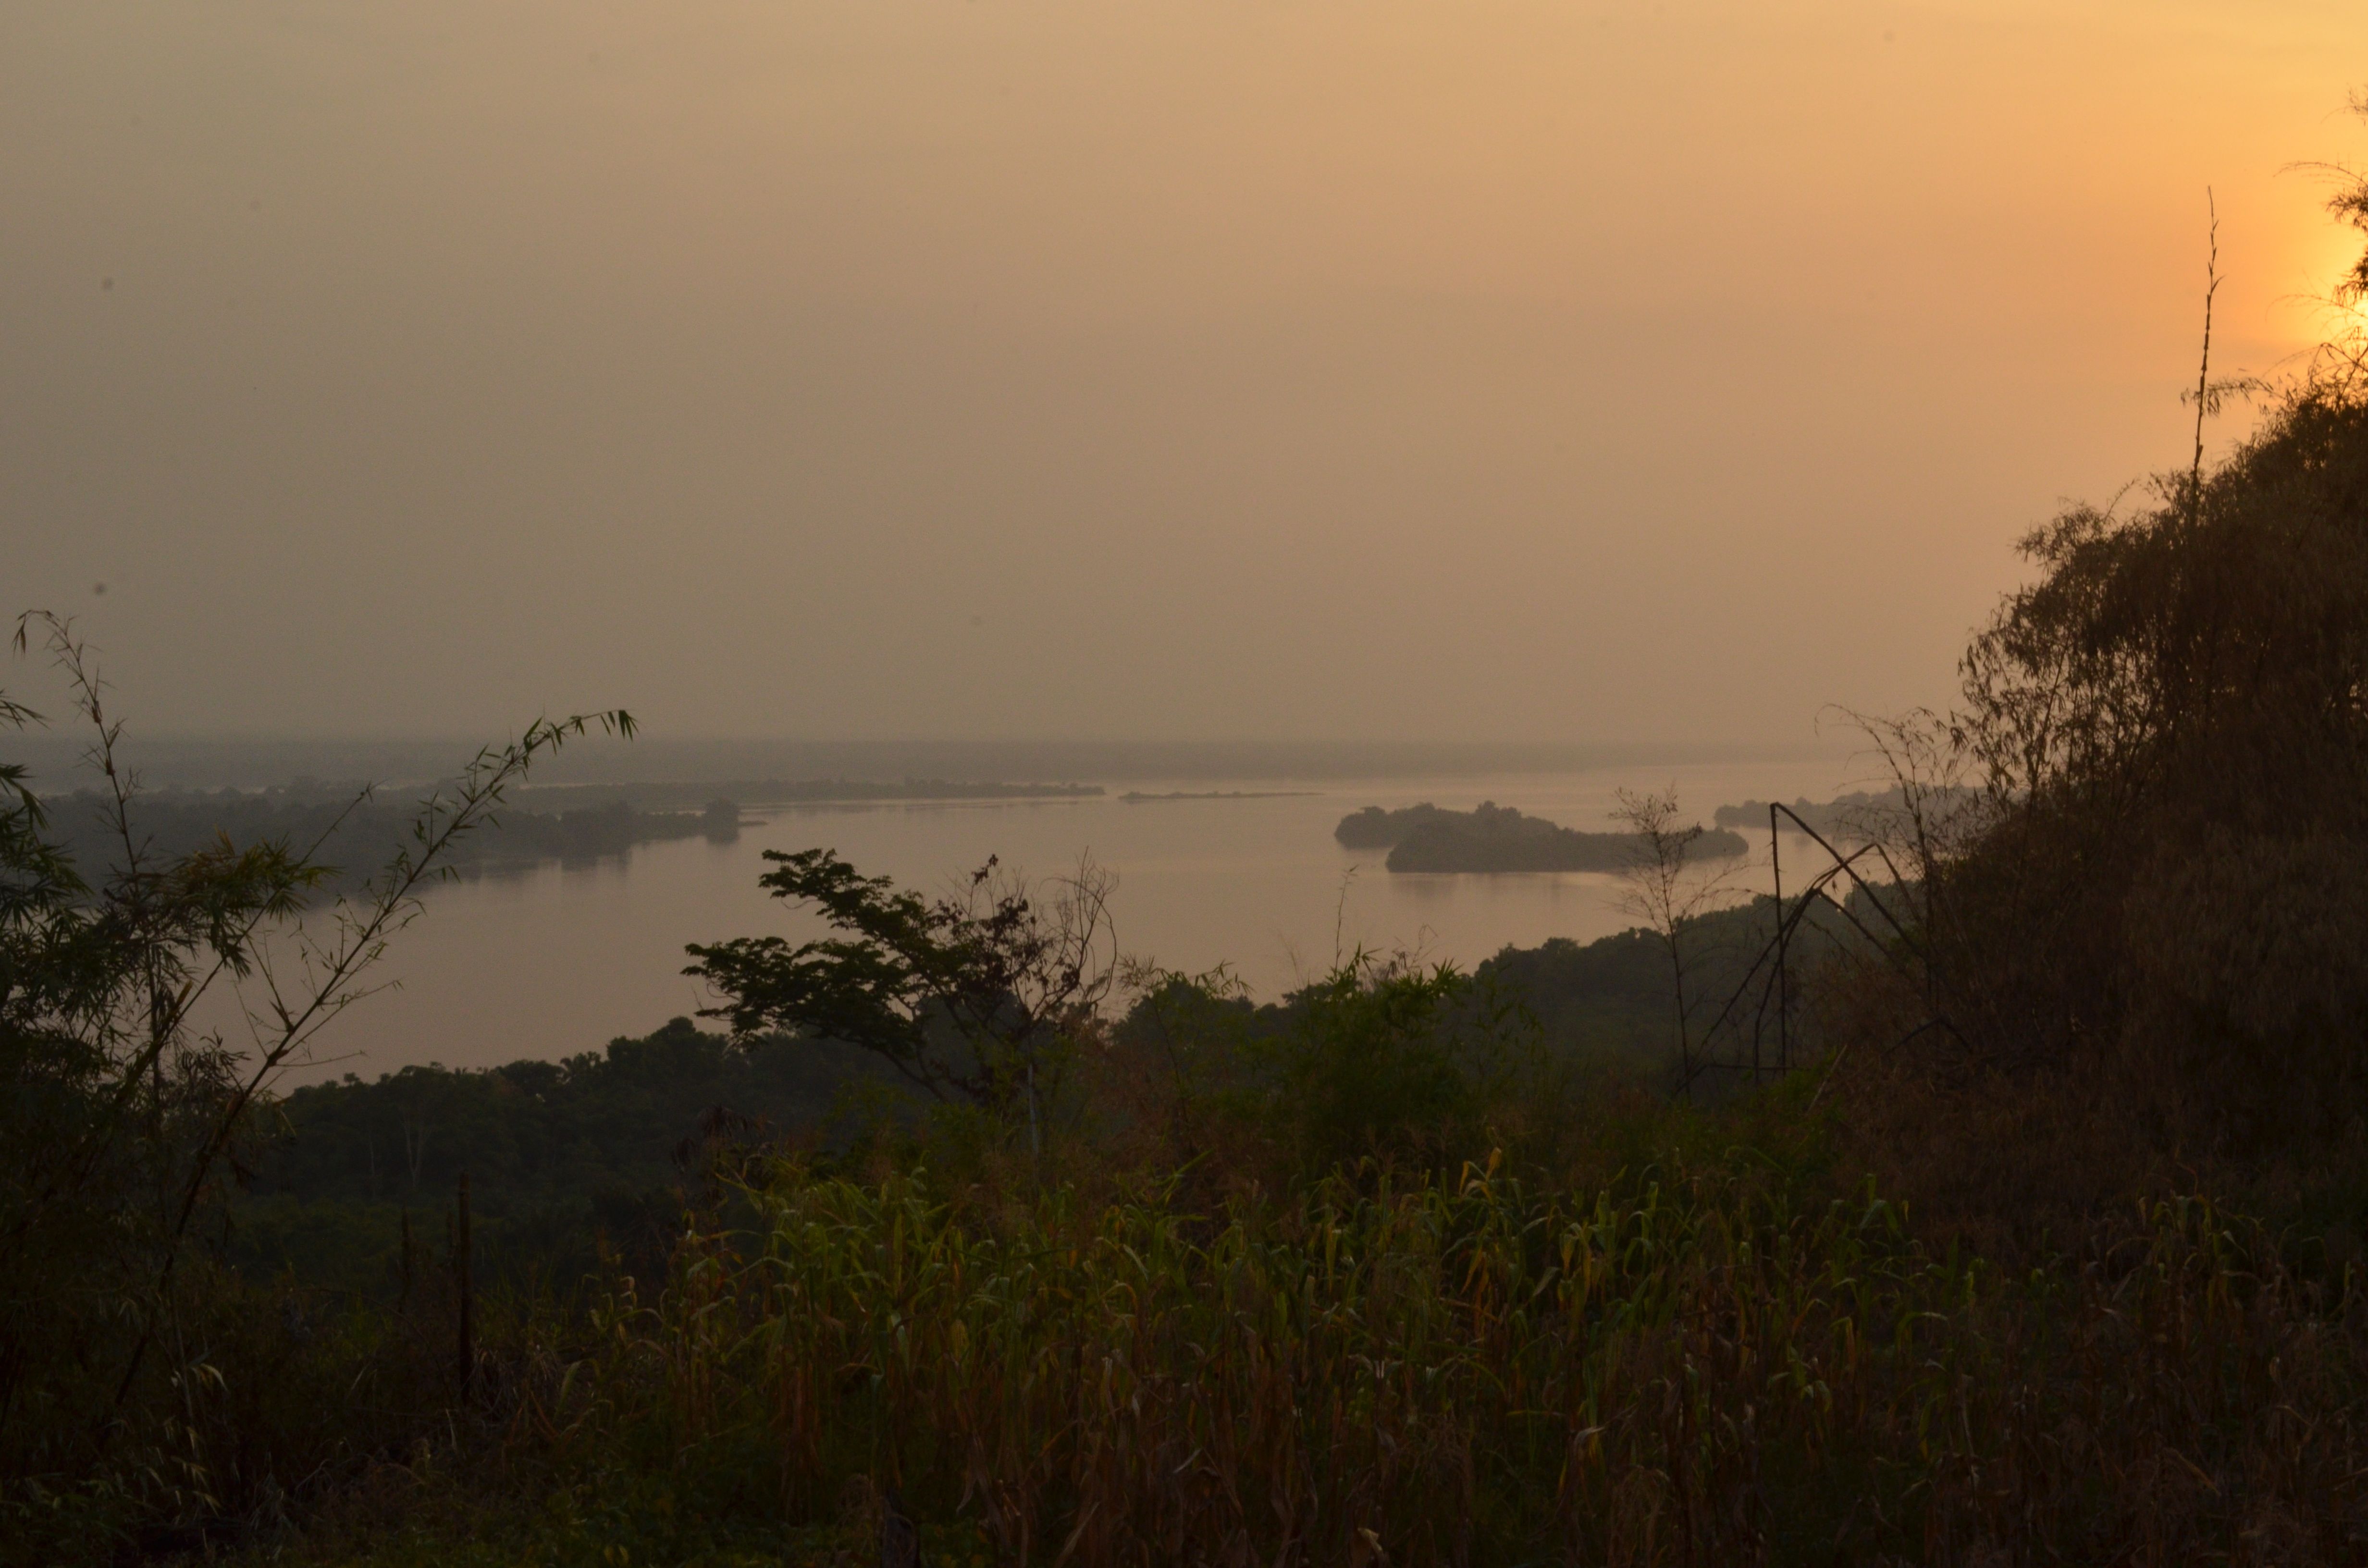 The Yangambi Research Station, overlooking the Congo River, in the Democratic Republic of the Congo. Image by Daniel Grossman. Democratic Republic of the Congo, 2020.